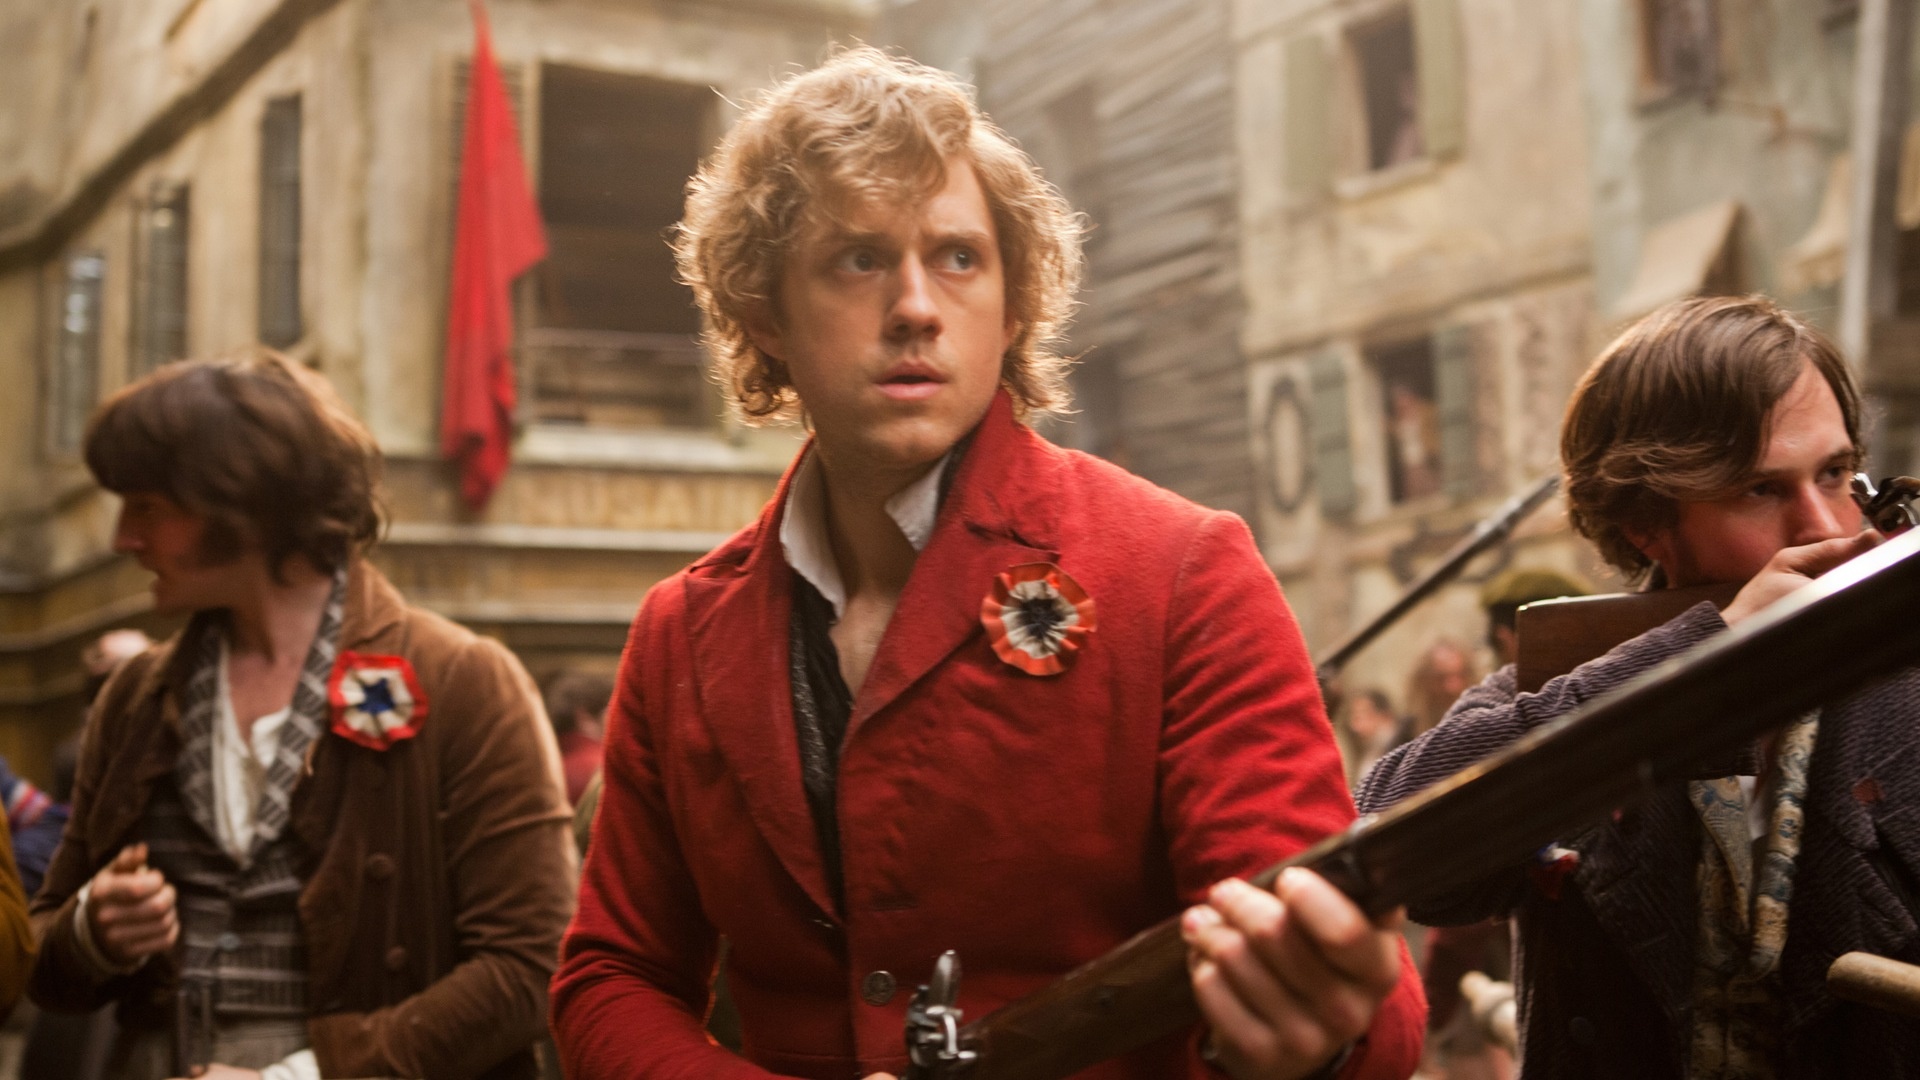 Les Miserables: The film was nominated for eight awards at the 85th Academy Awards. 1920x1080 Full HD Background.